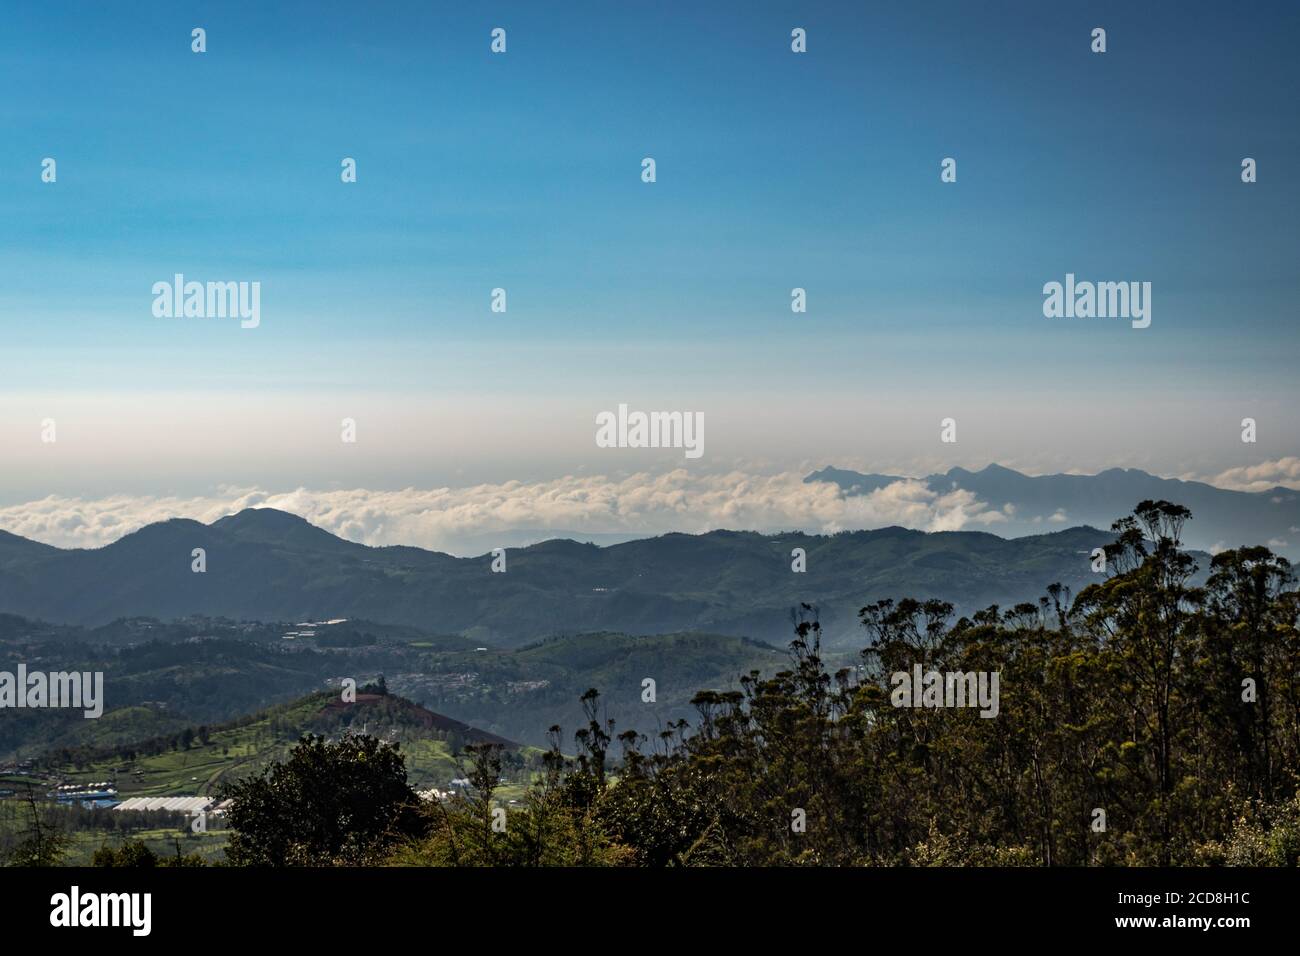 mountain range with cloud layers and green forest image is taken at south india. it is showing the beautiful landscape of south india. Stock Photo